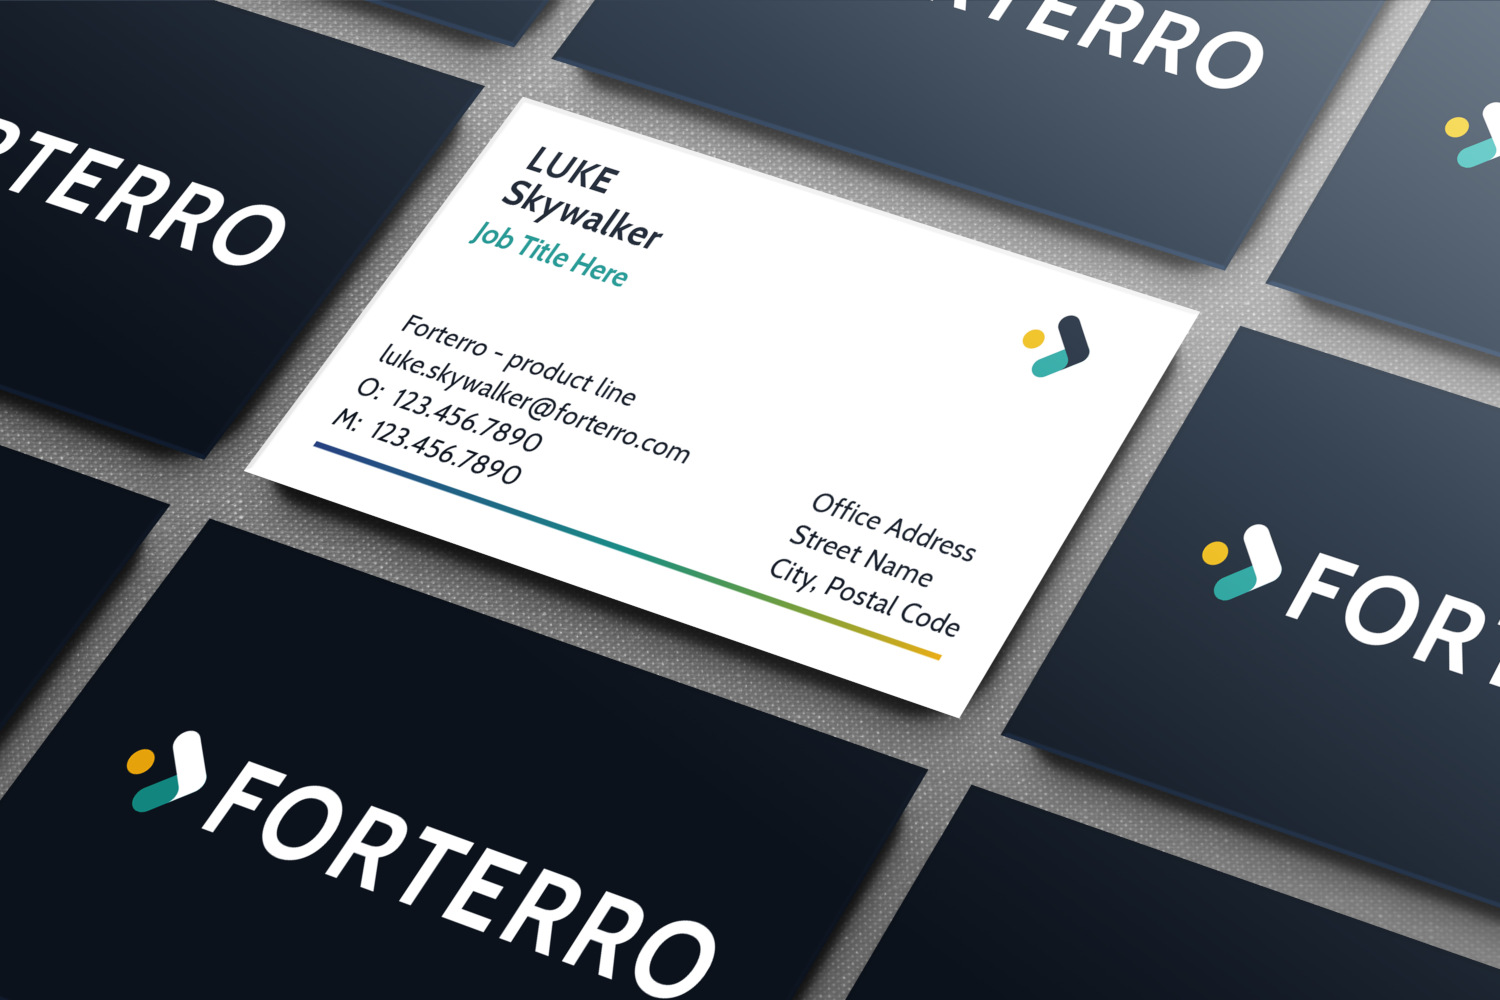 Forterro business cards